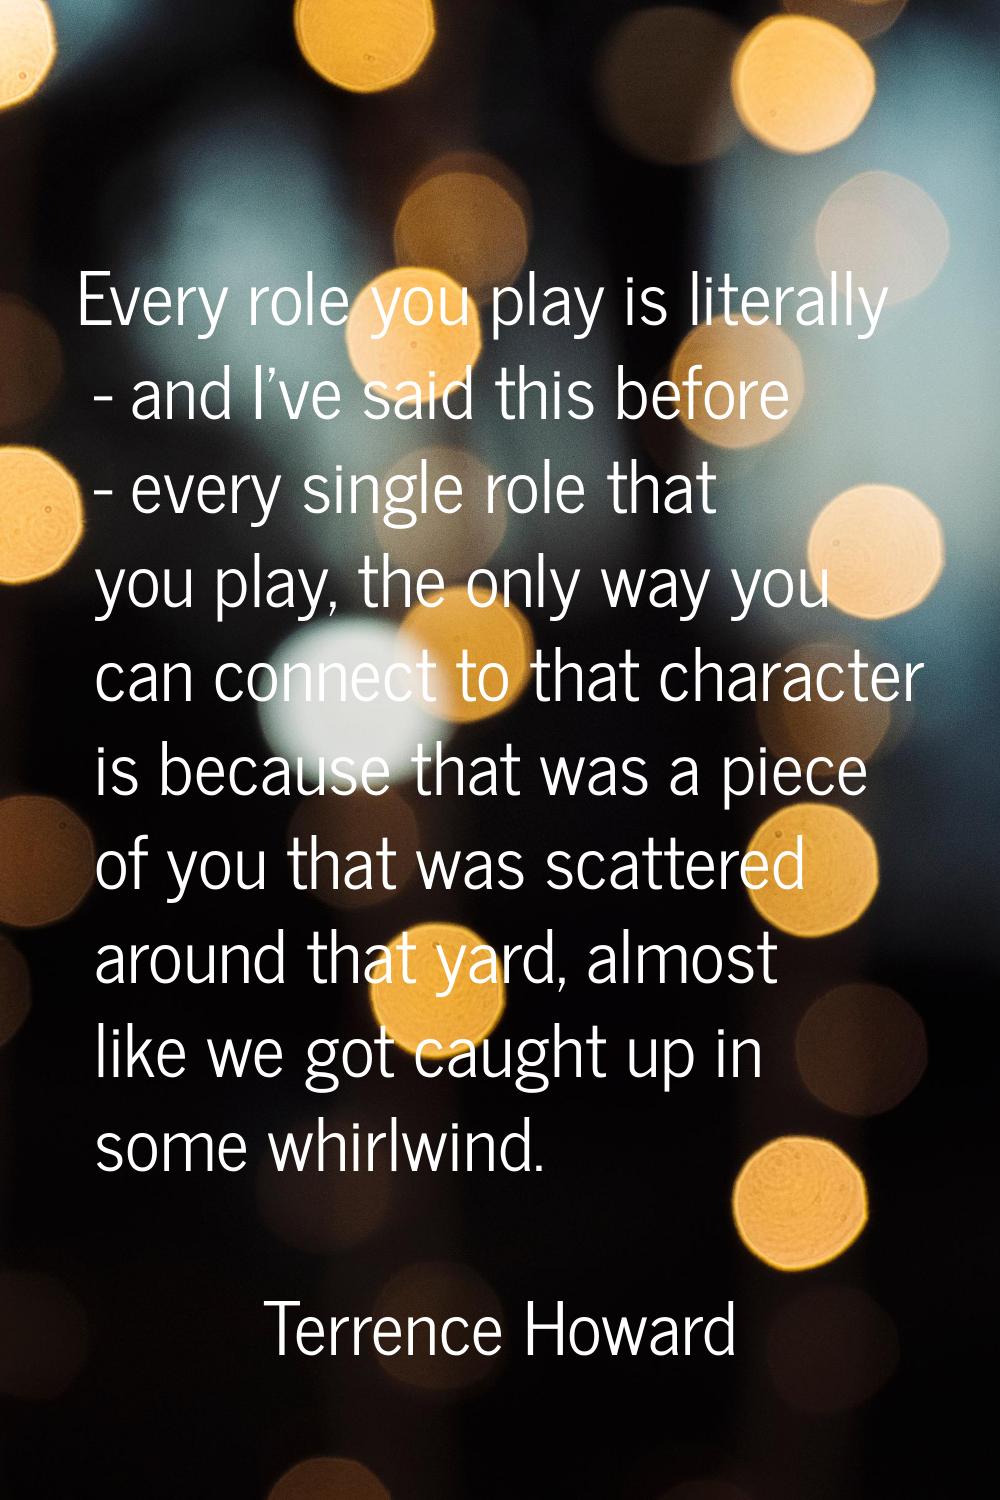 Every role you play is literally - and I've said this before - every single role that you play, the